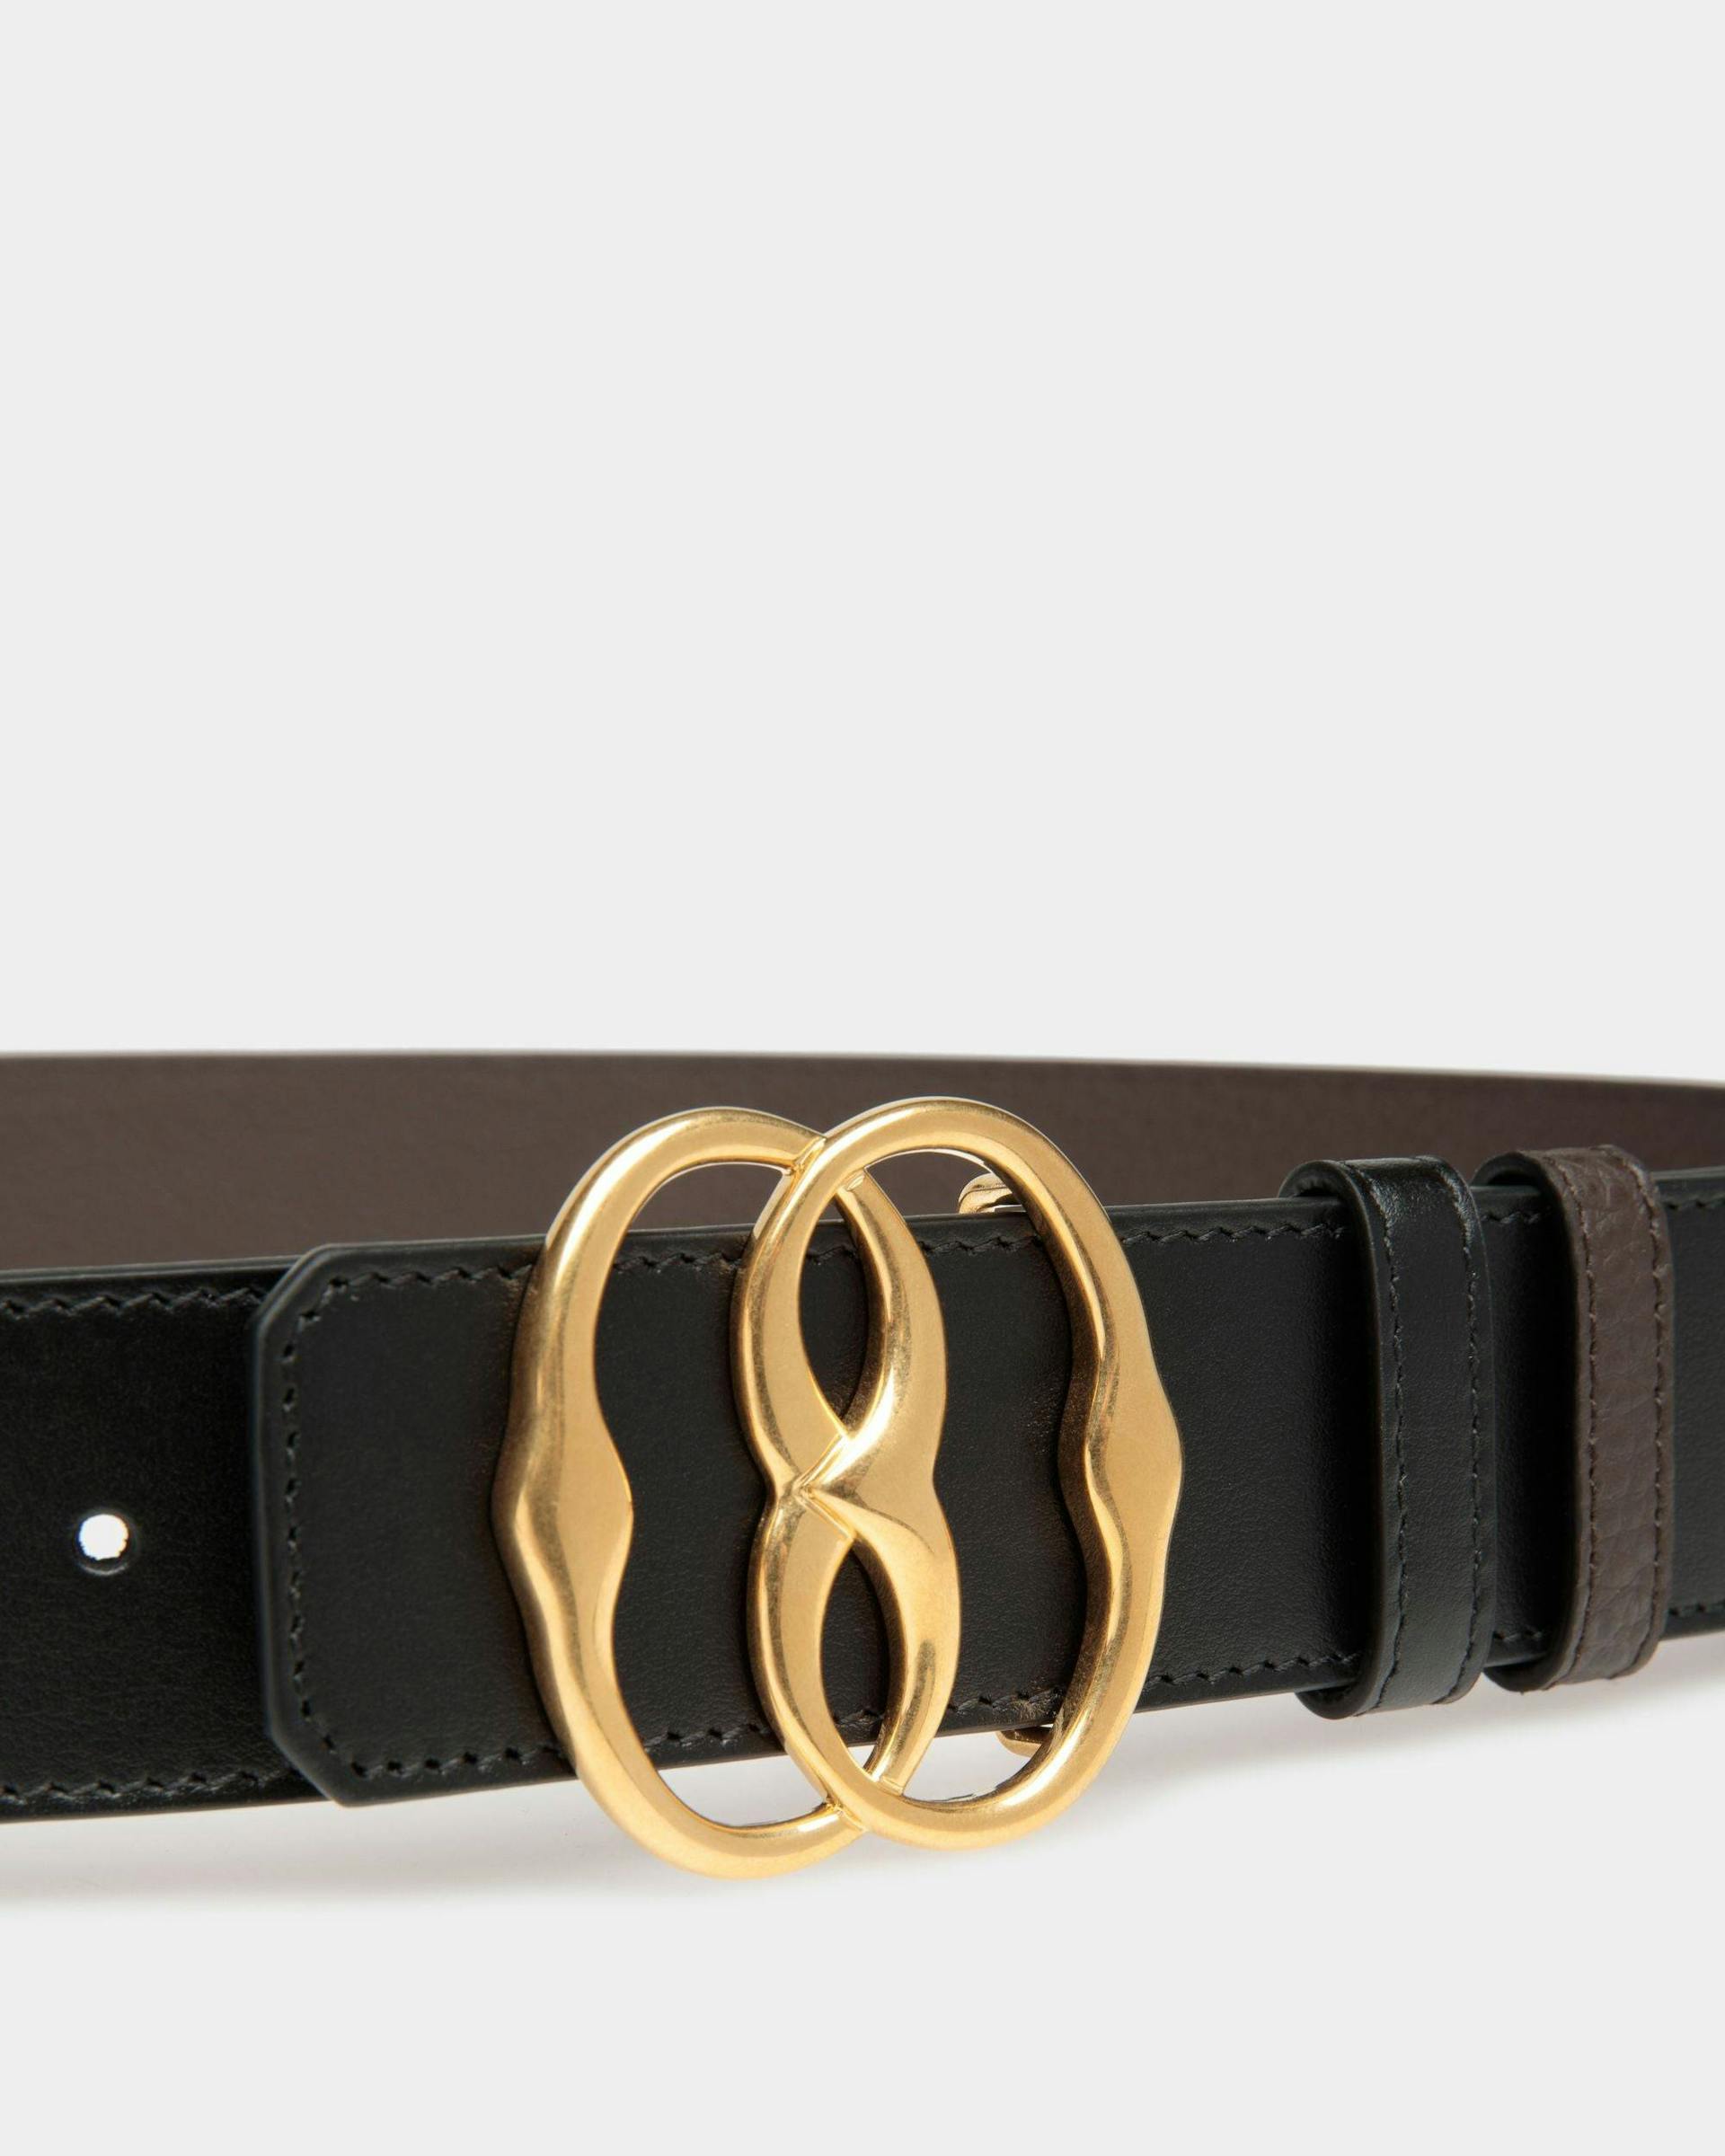 Bally Iconic 35mm Belt In Brown And Black Leather - Men's - Bally - 03